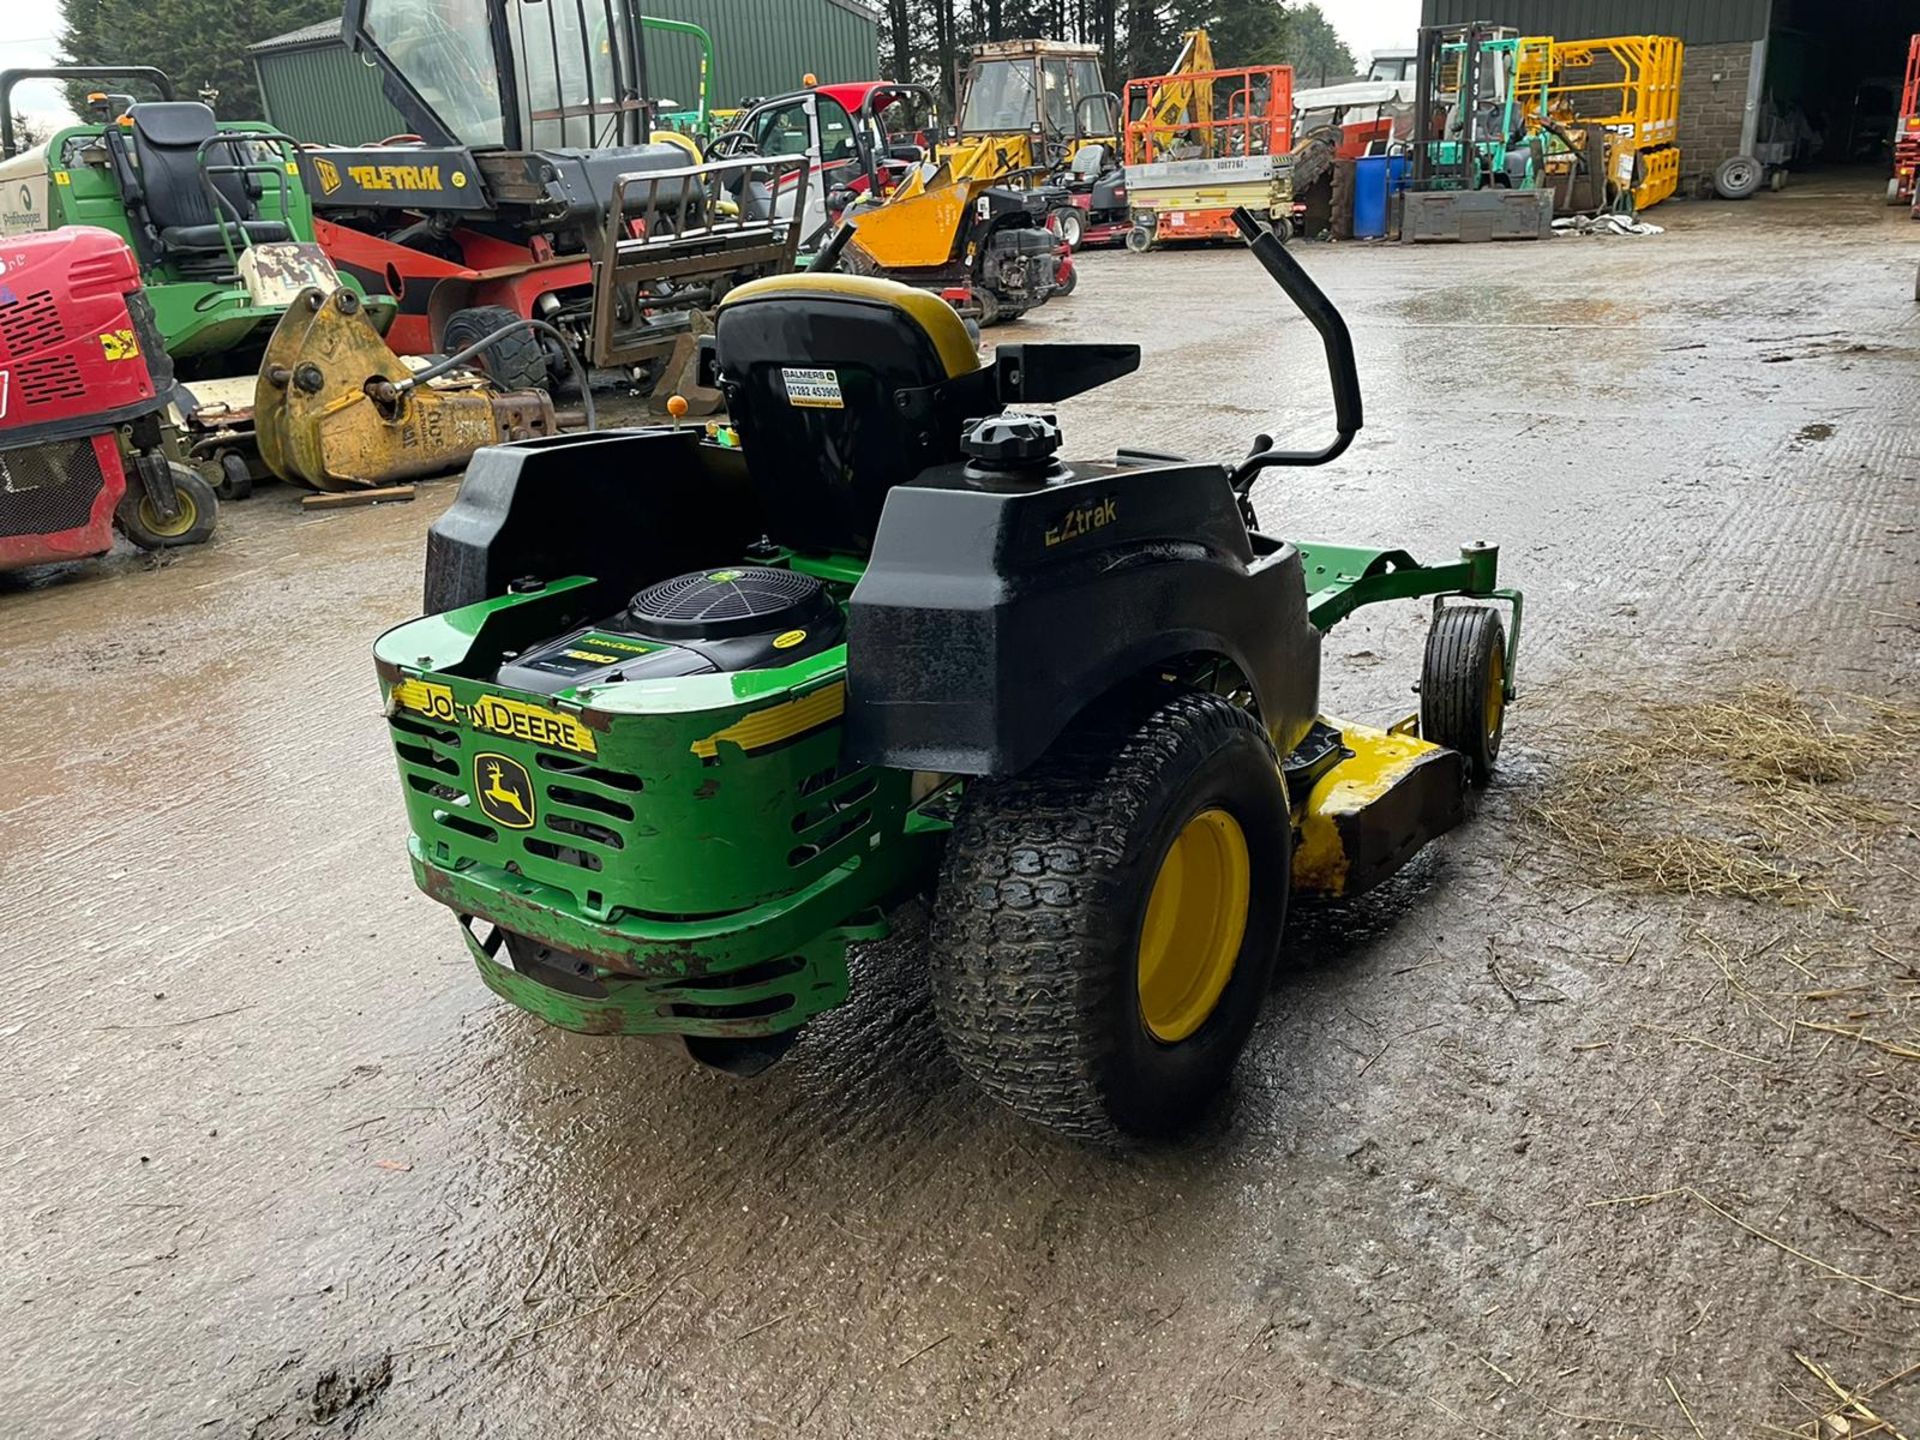 2014 JOHN DEERE Z435 ZERO TURN MOWER, SOLD NEW IN 2015, RUNS, DRIVES AND CUTS, GOOD CONDITION - Image 8 of 8